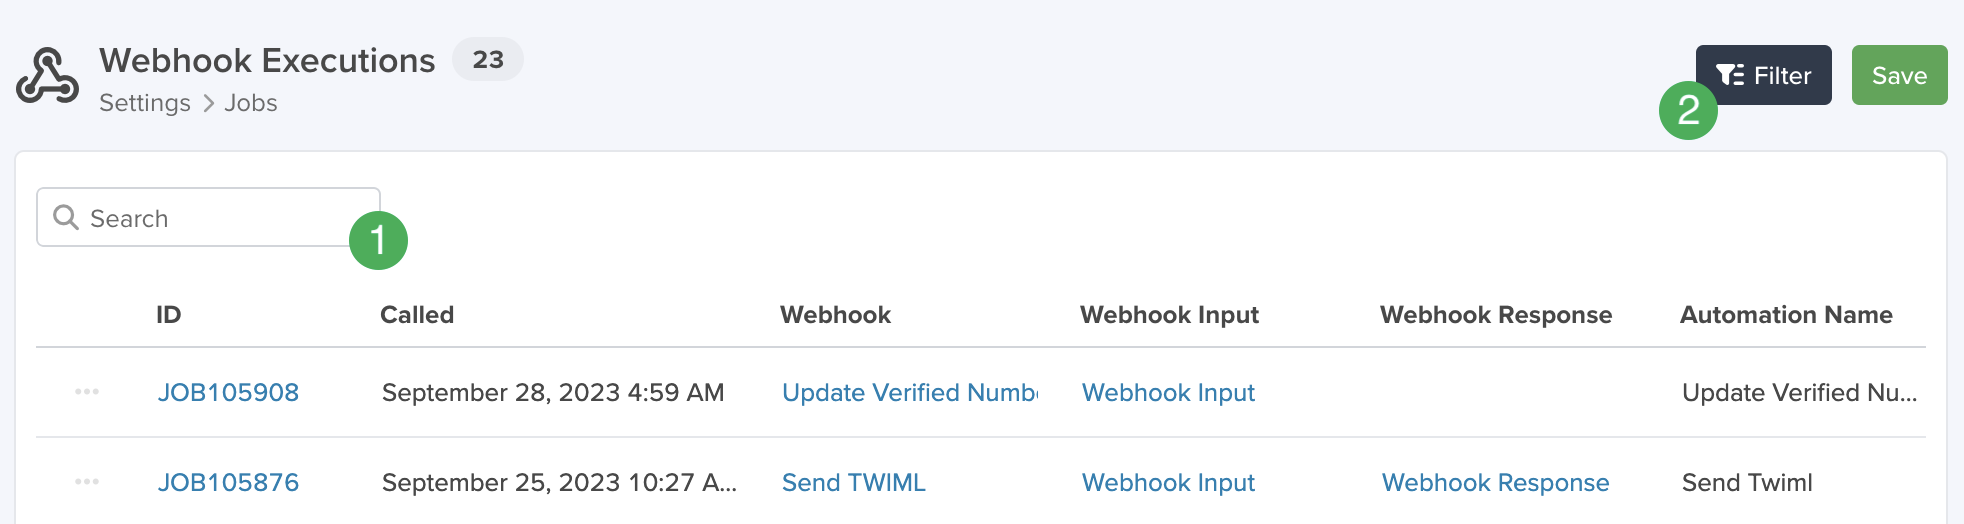 webhook_execustions_search.png